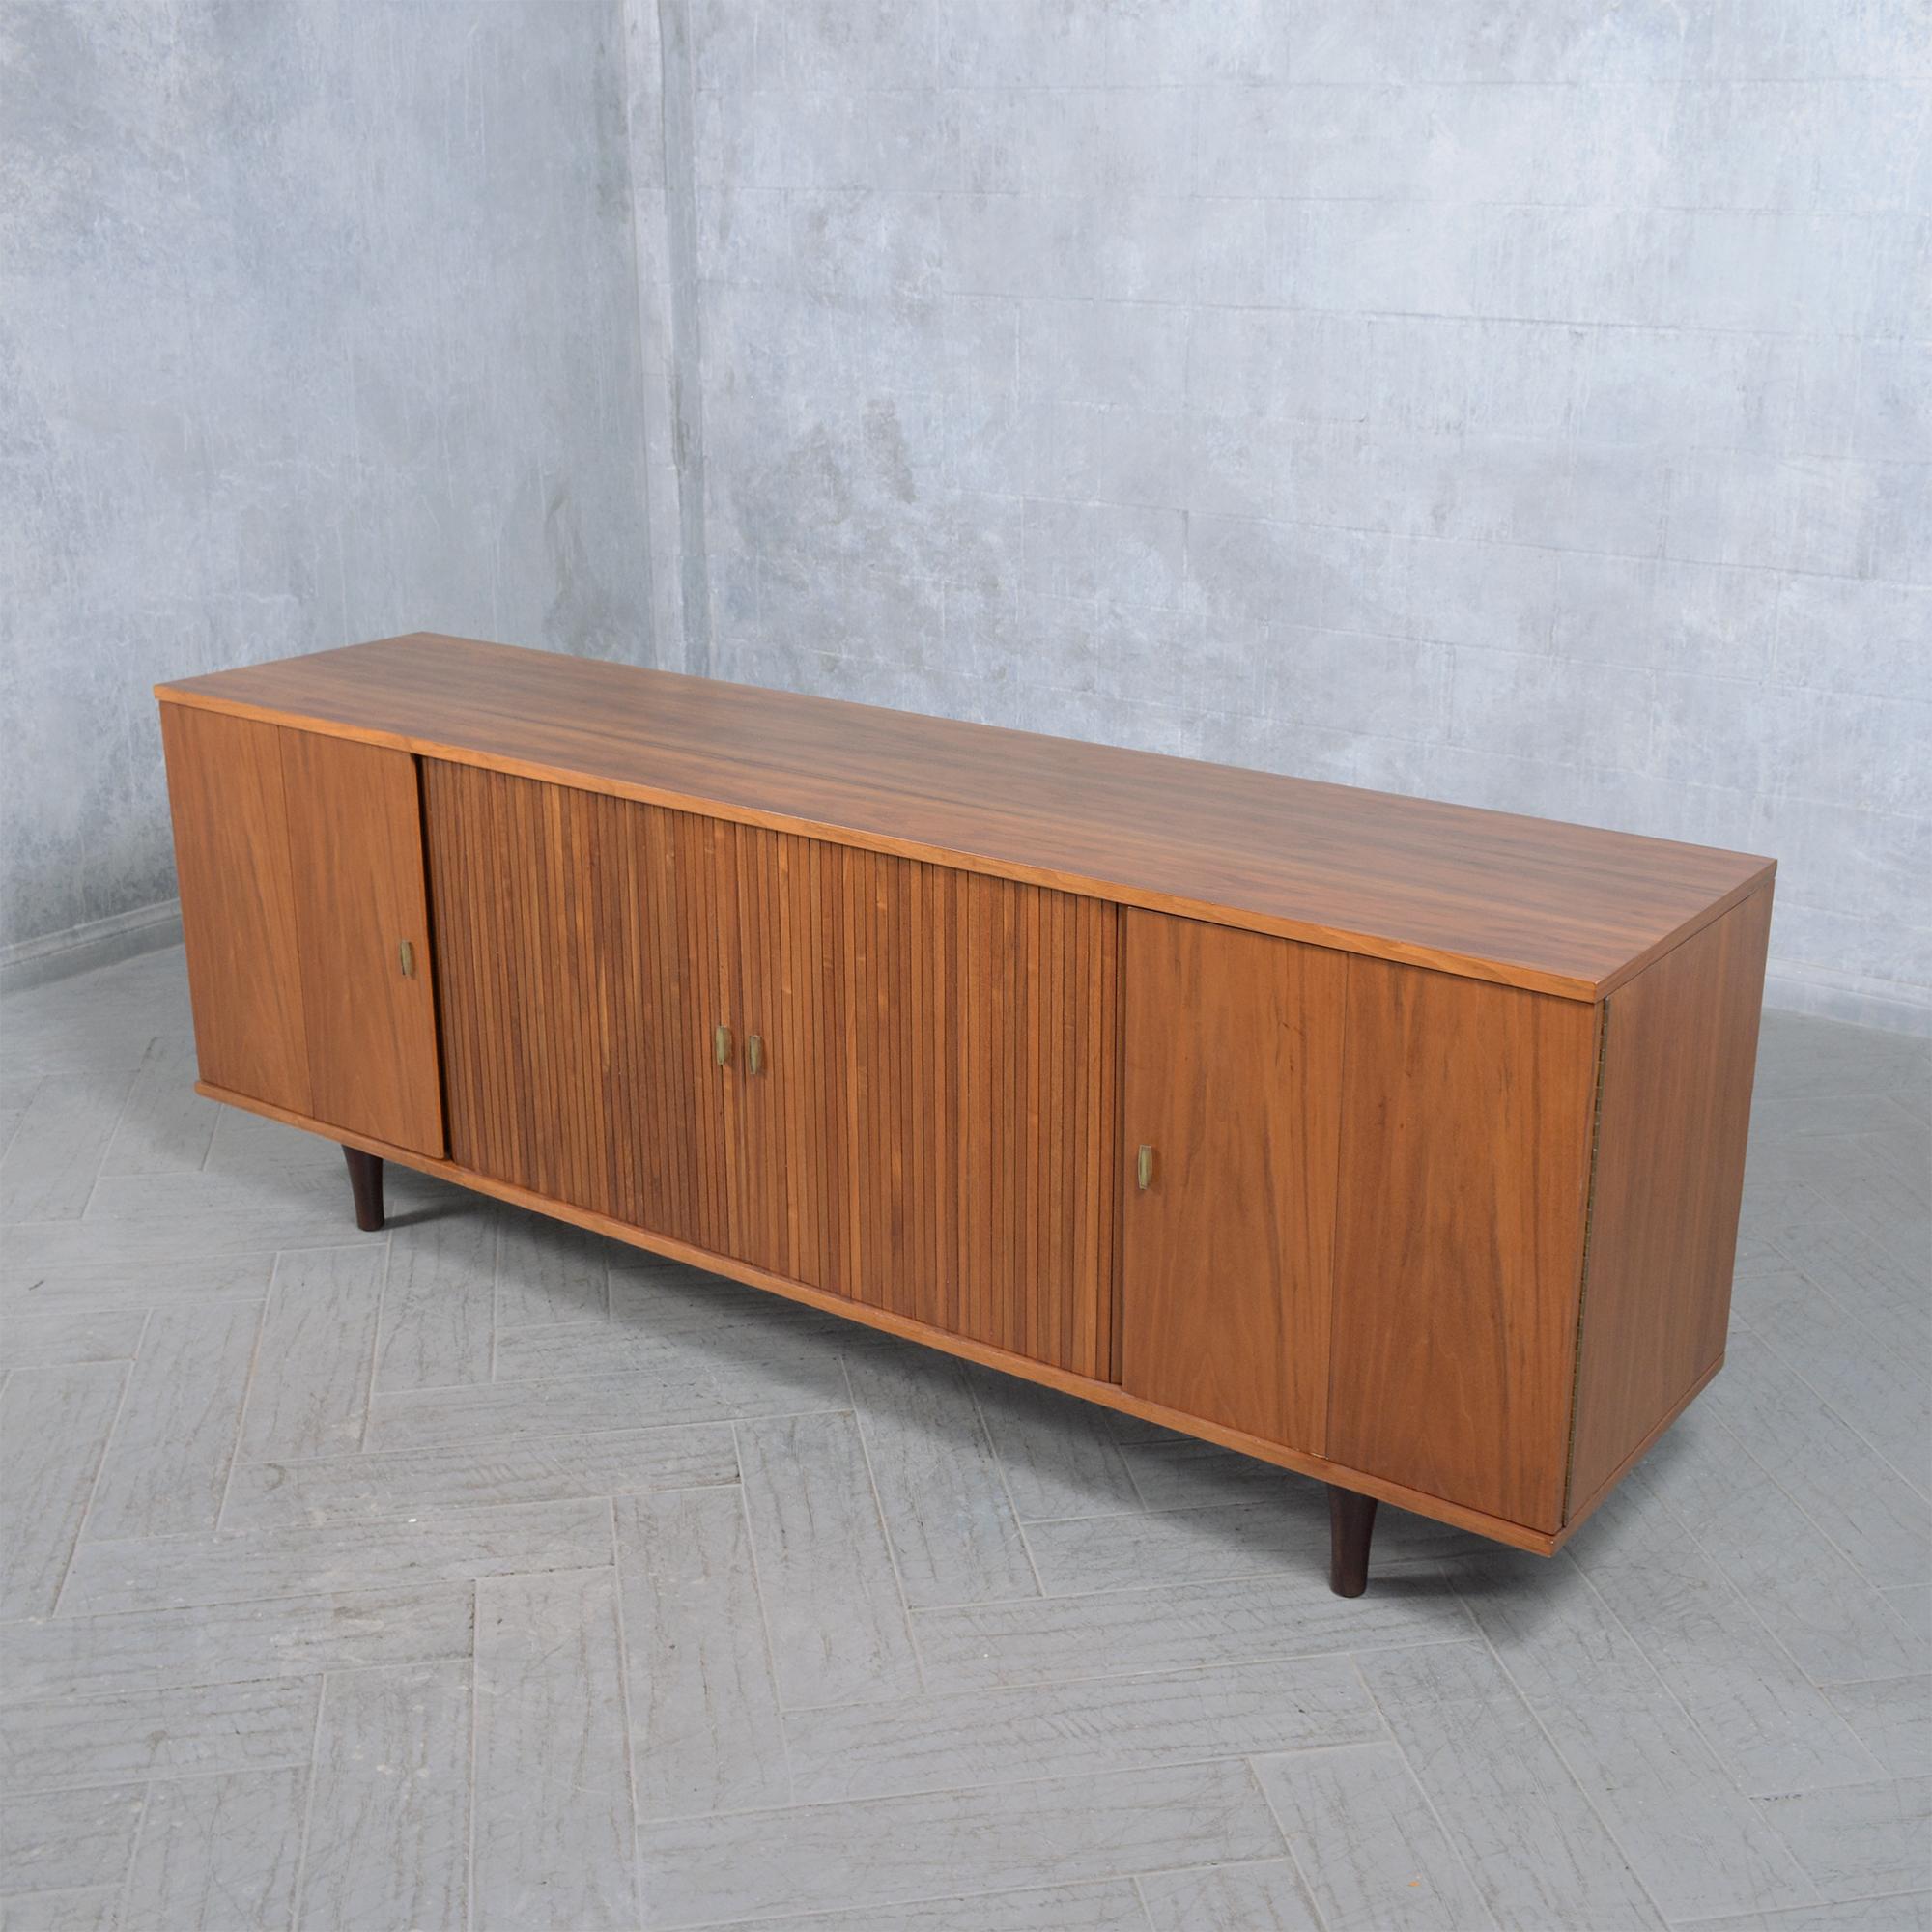 1960s Mid-Century Modern Walnut Credenza with Tambour Doors and Storage For Sale 4